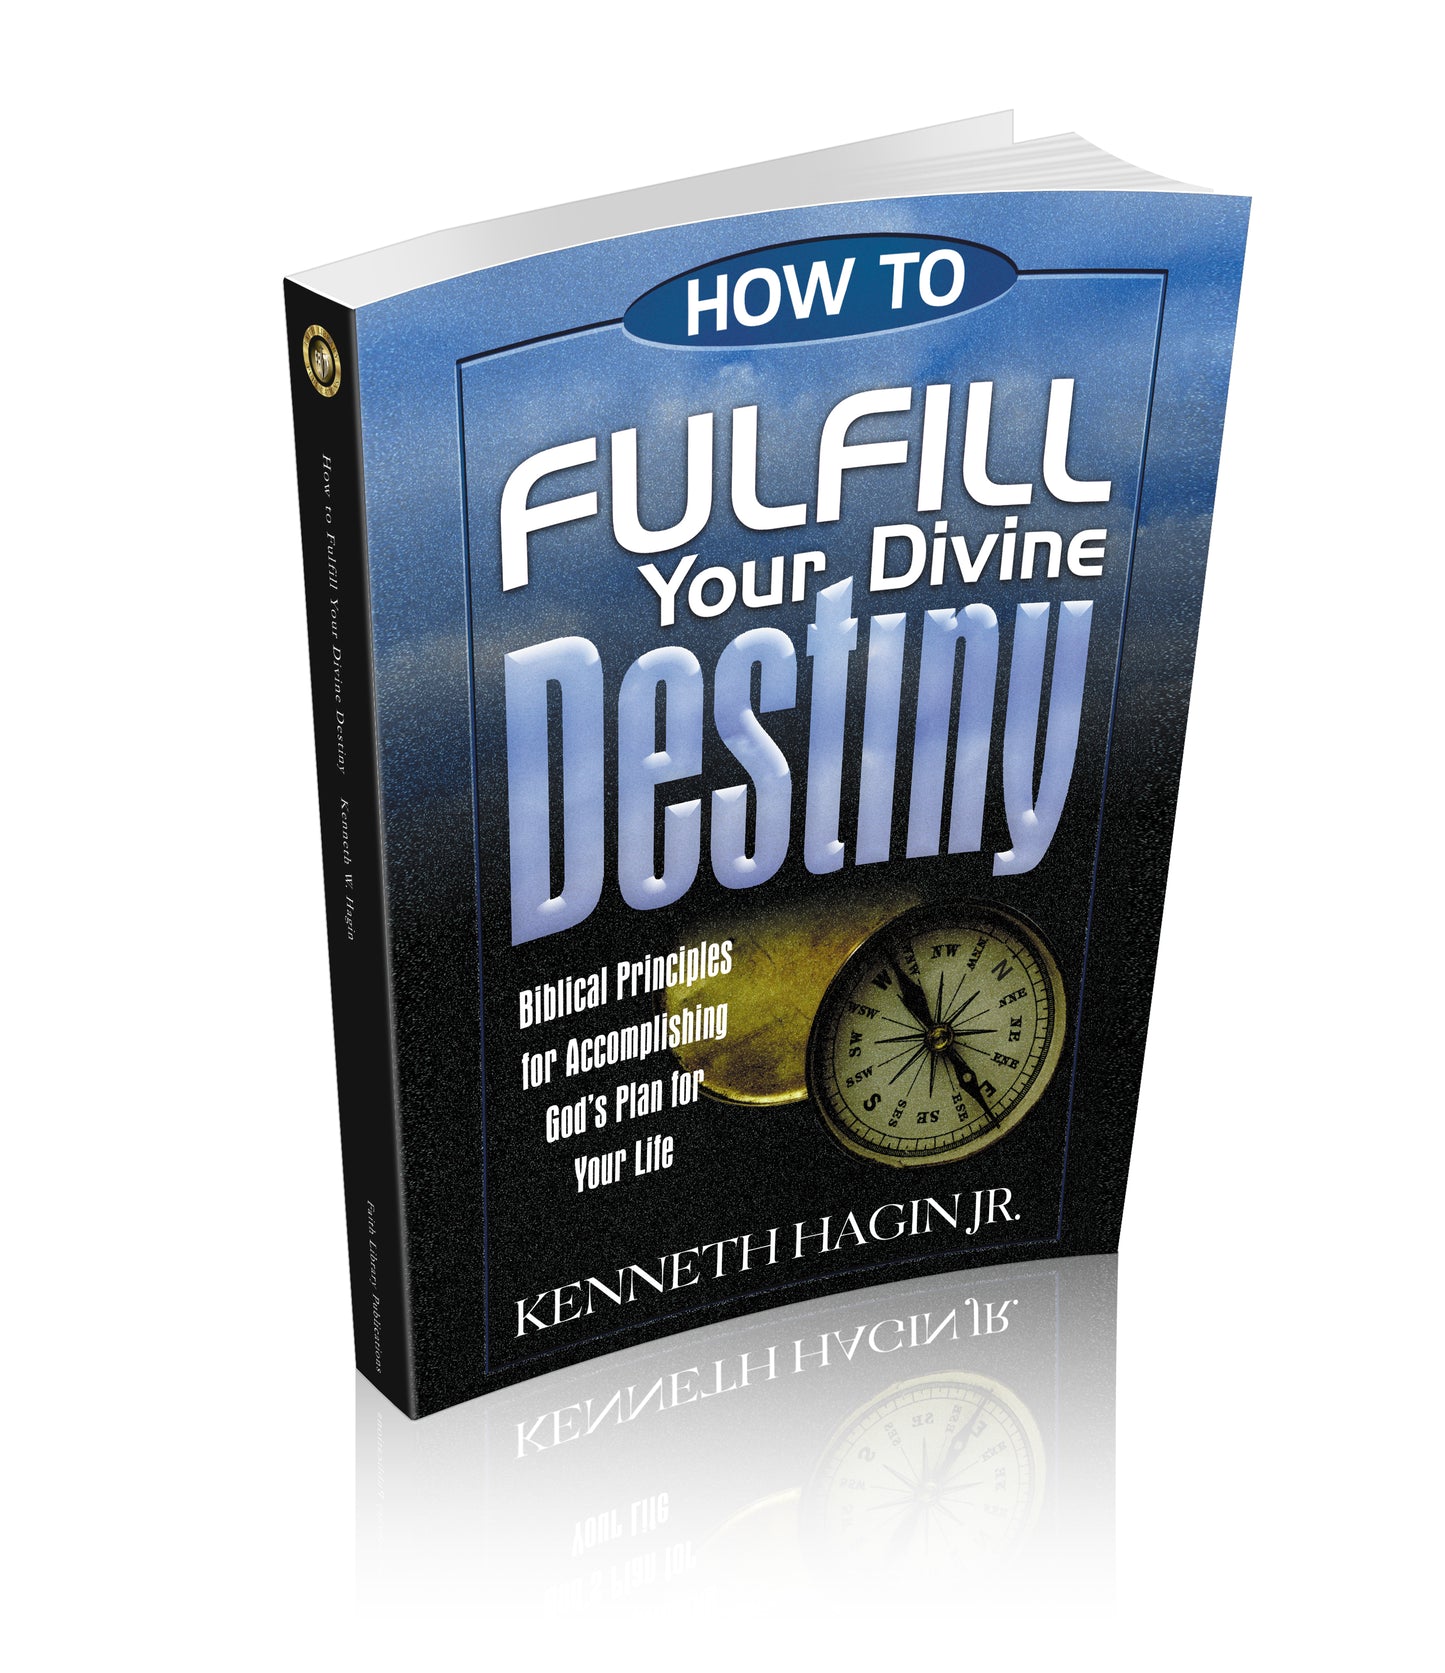 How to Fulfill Your Divine Destiny